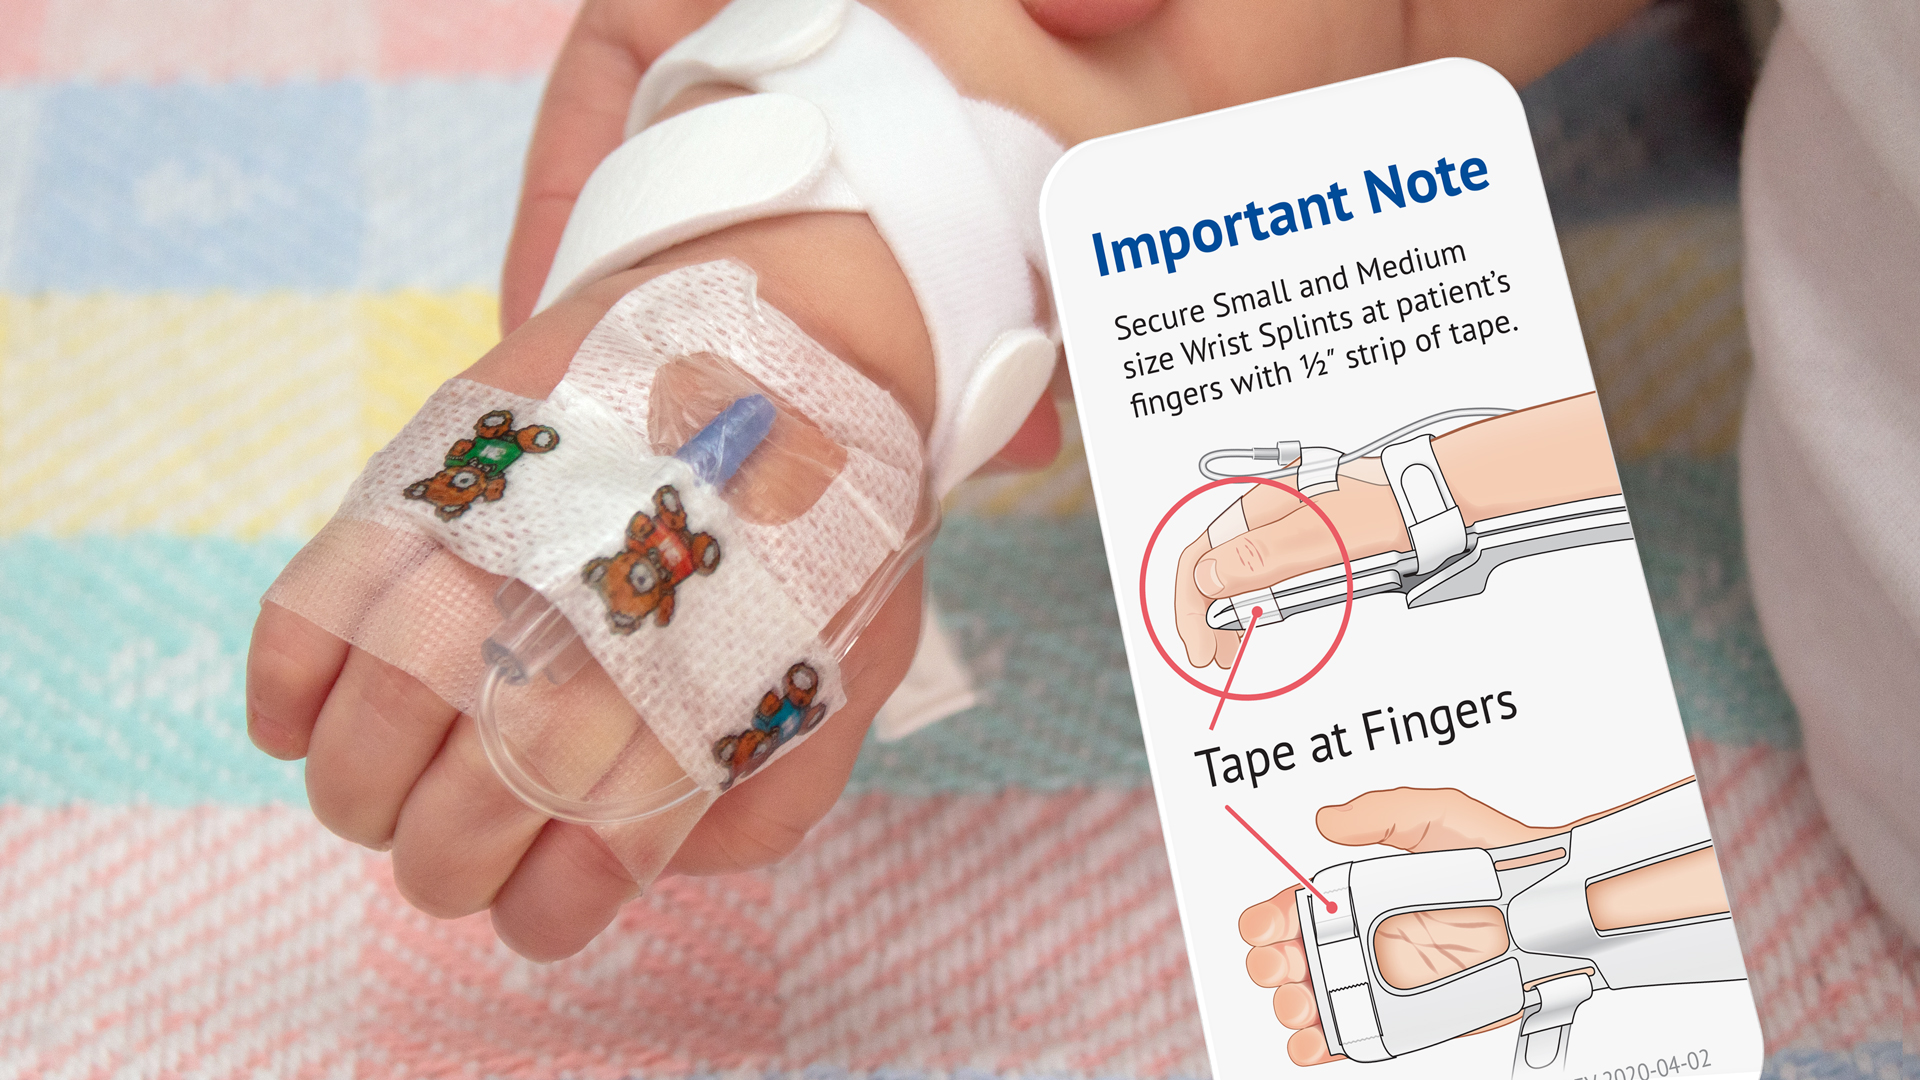 Finger Tape Note Prompts Nurses to Secure Wriggly Fingers of Young Patients